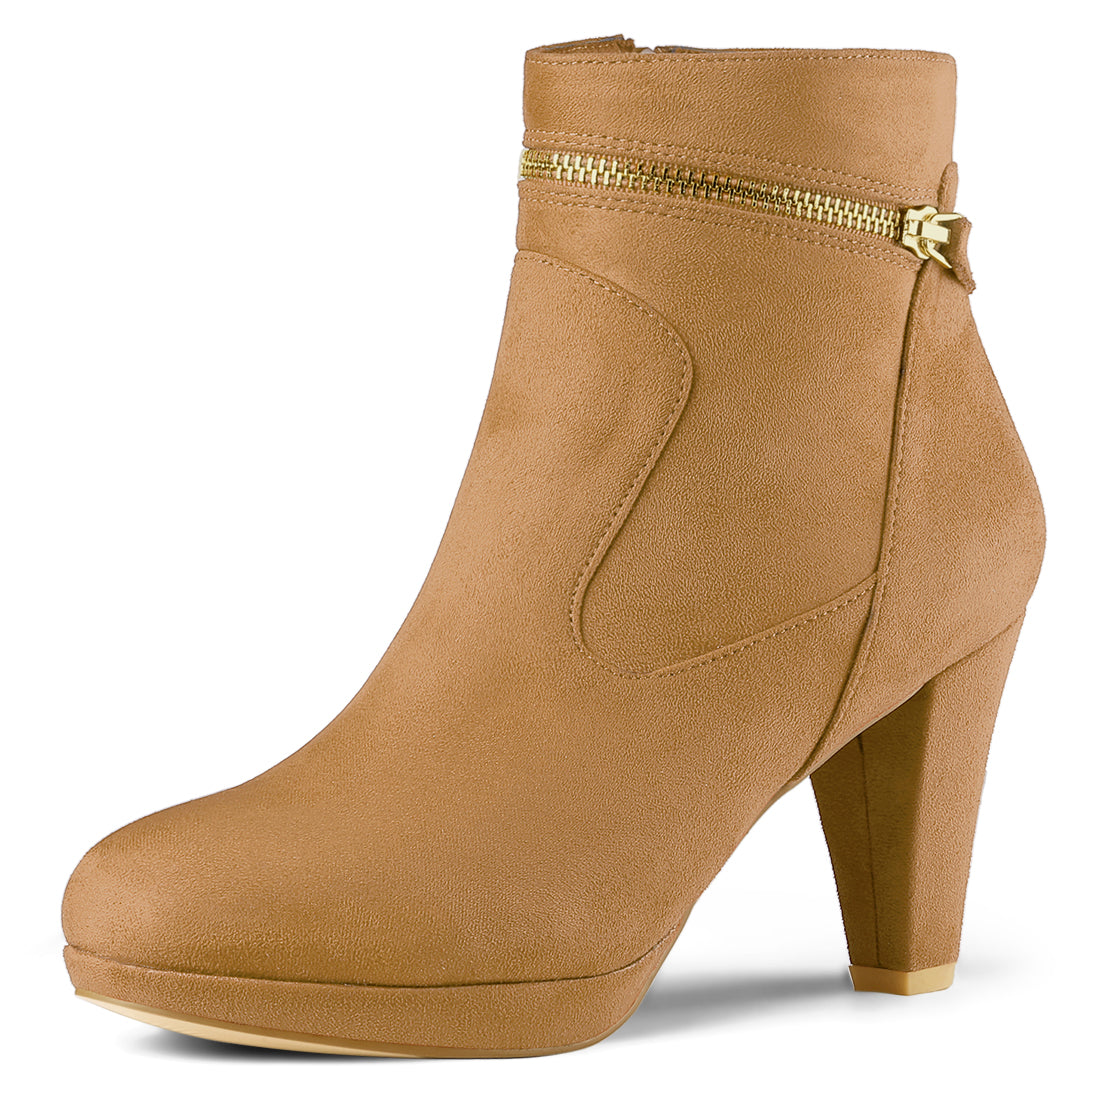 Allegra K Faux Suede Round Toe Ankle Mid Block Heel Boots